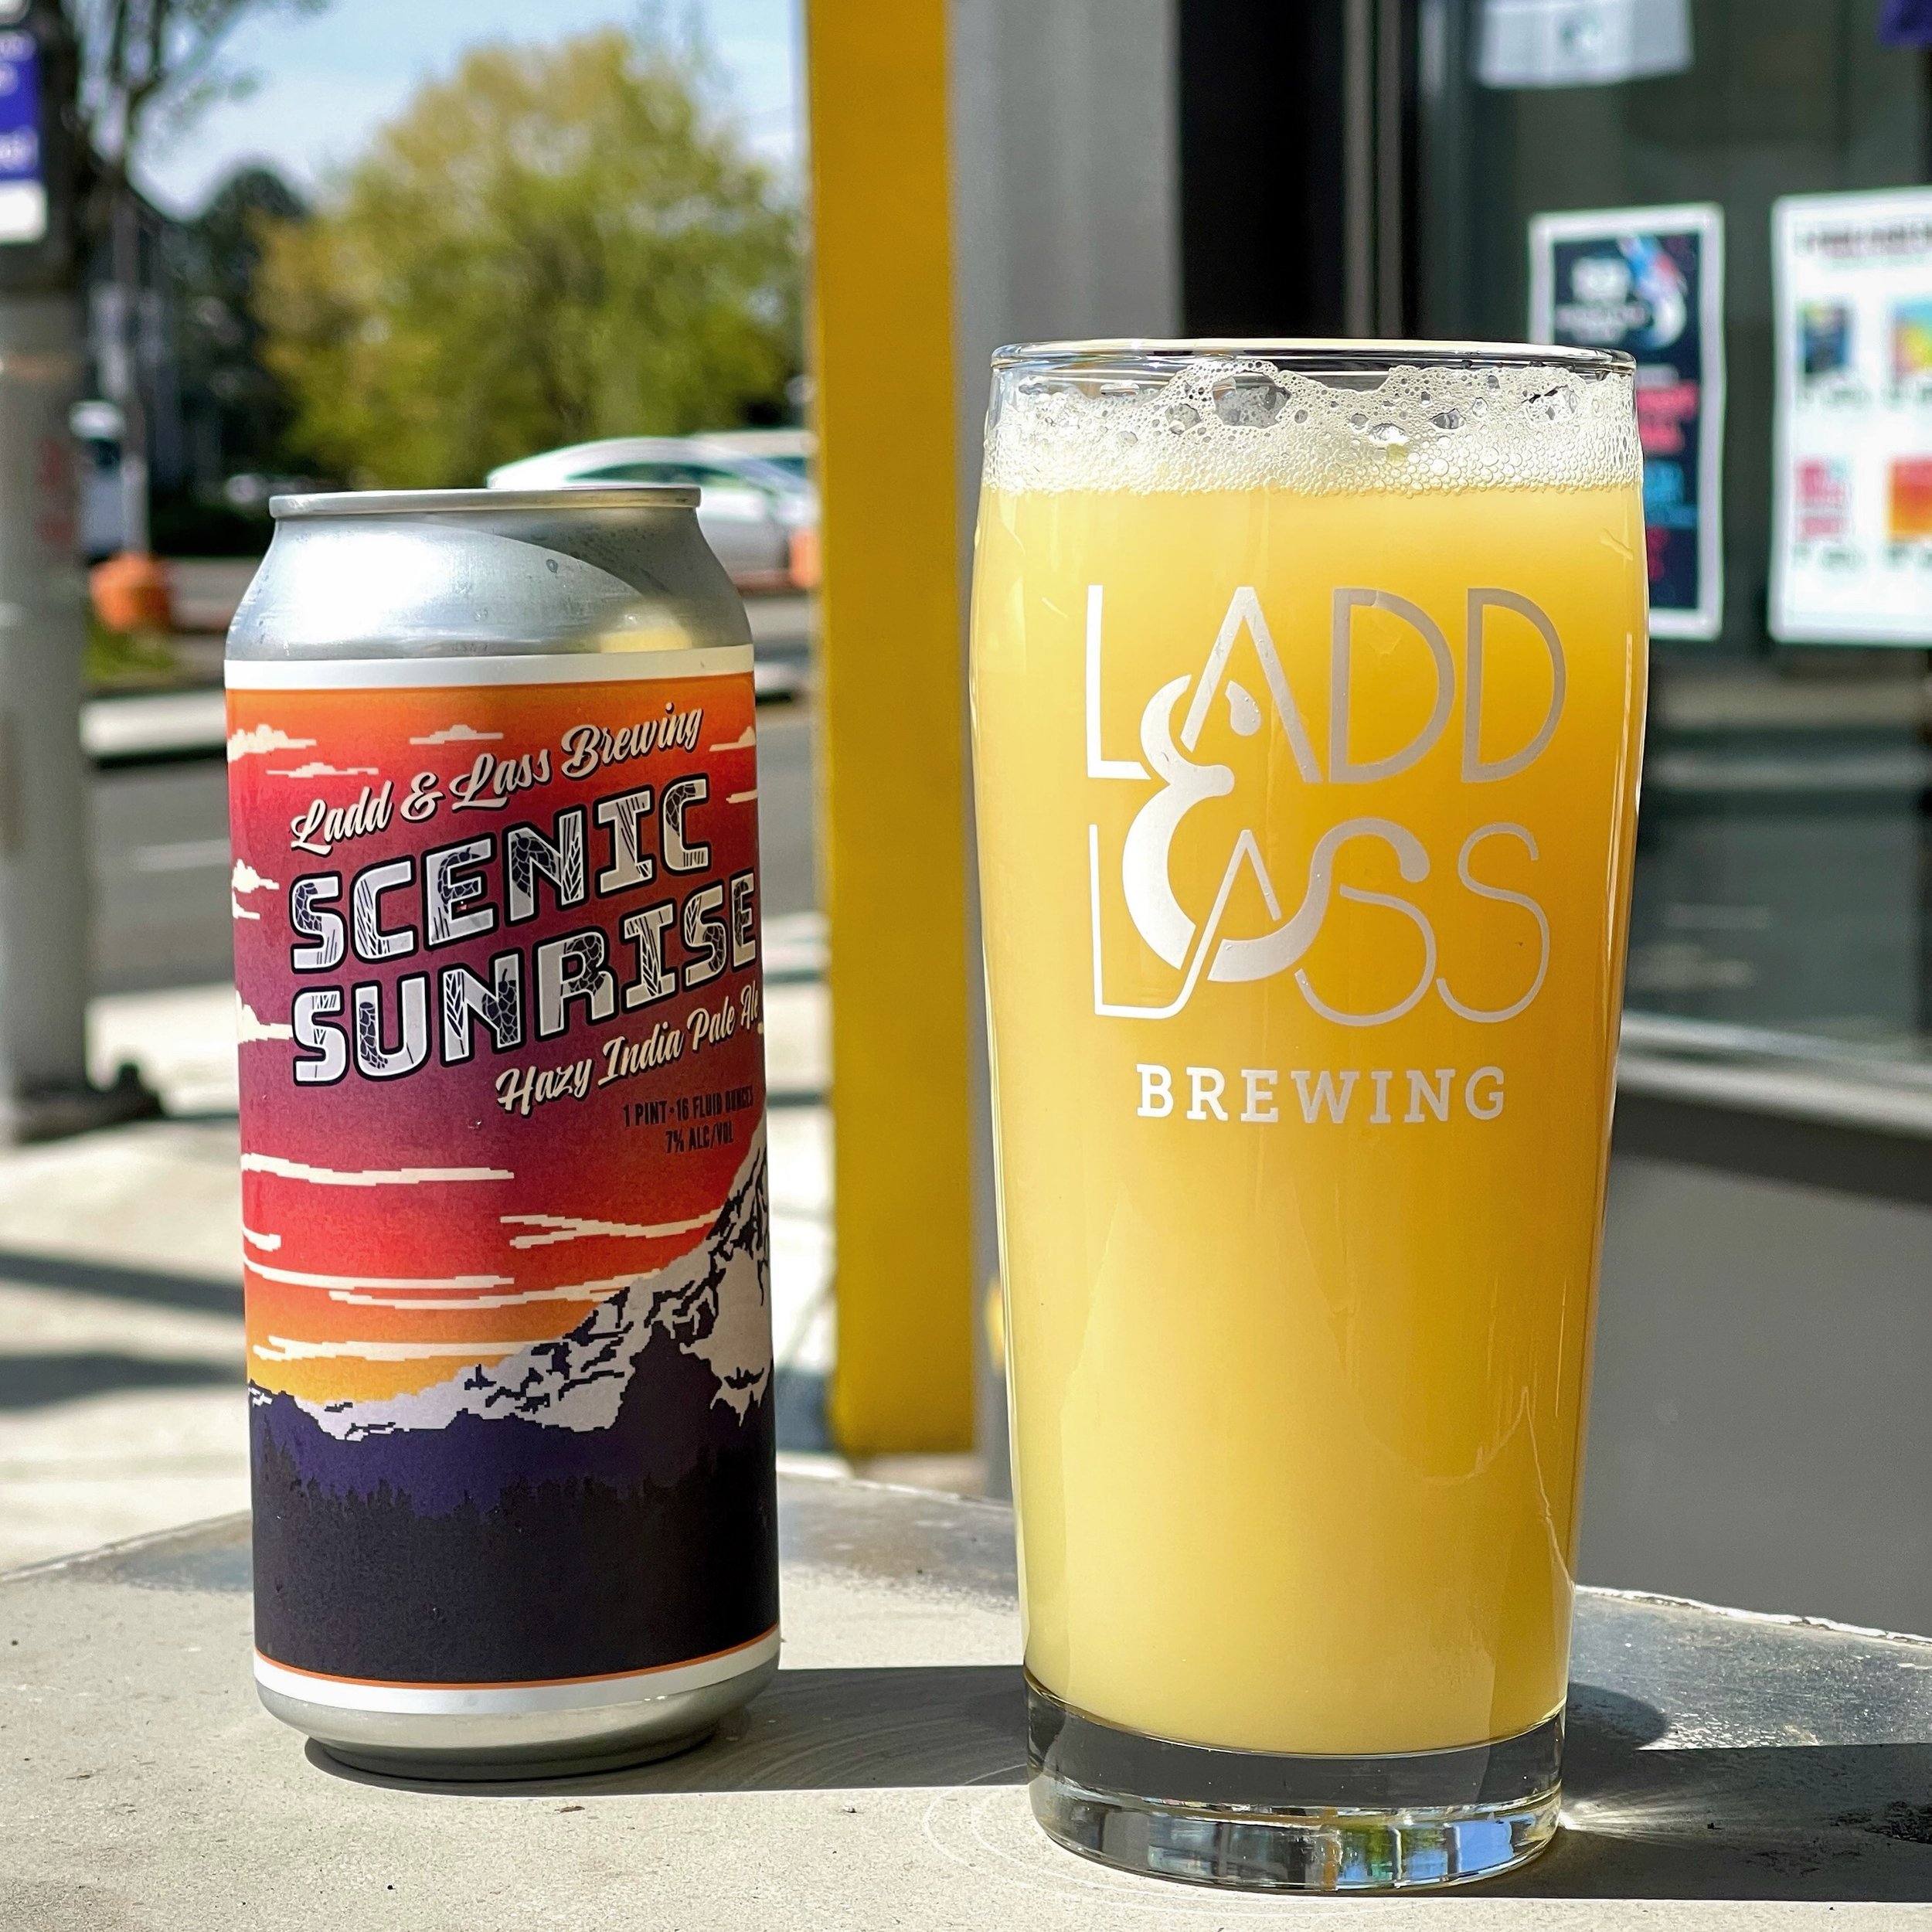 NEW RELEASE!

Scenic Sunrise
Hazy IPA / 7% ABV

Transport yourself to a scenic vista with our latest hoppy creation. Scenic Sunrise incorporates a healthy dose of Vista, the most recent release from the USDA public hop breeding program. Expect bright